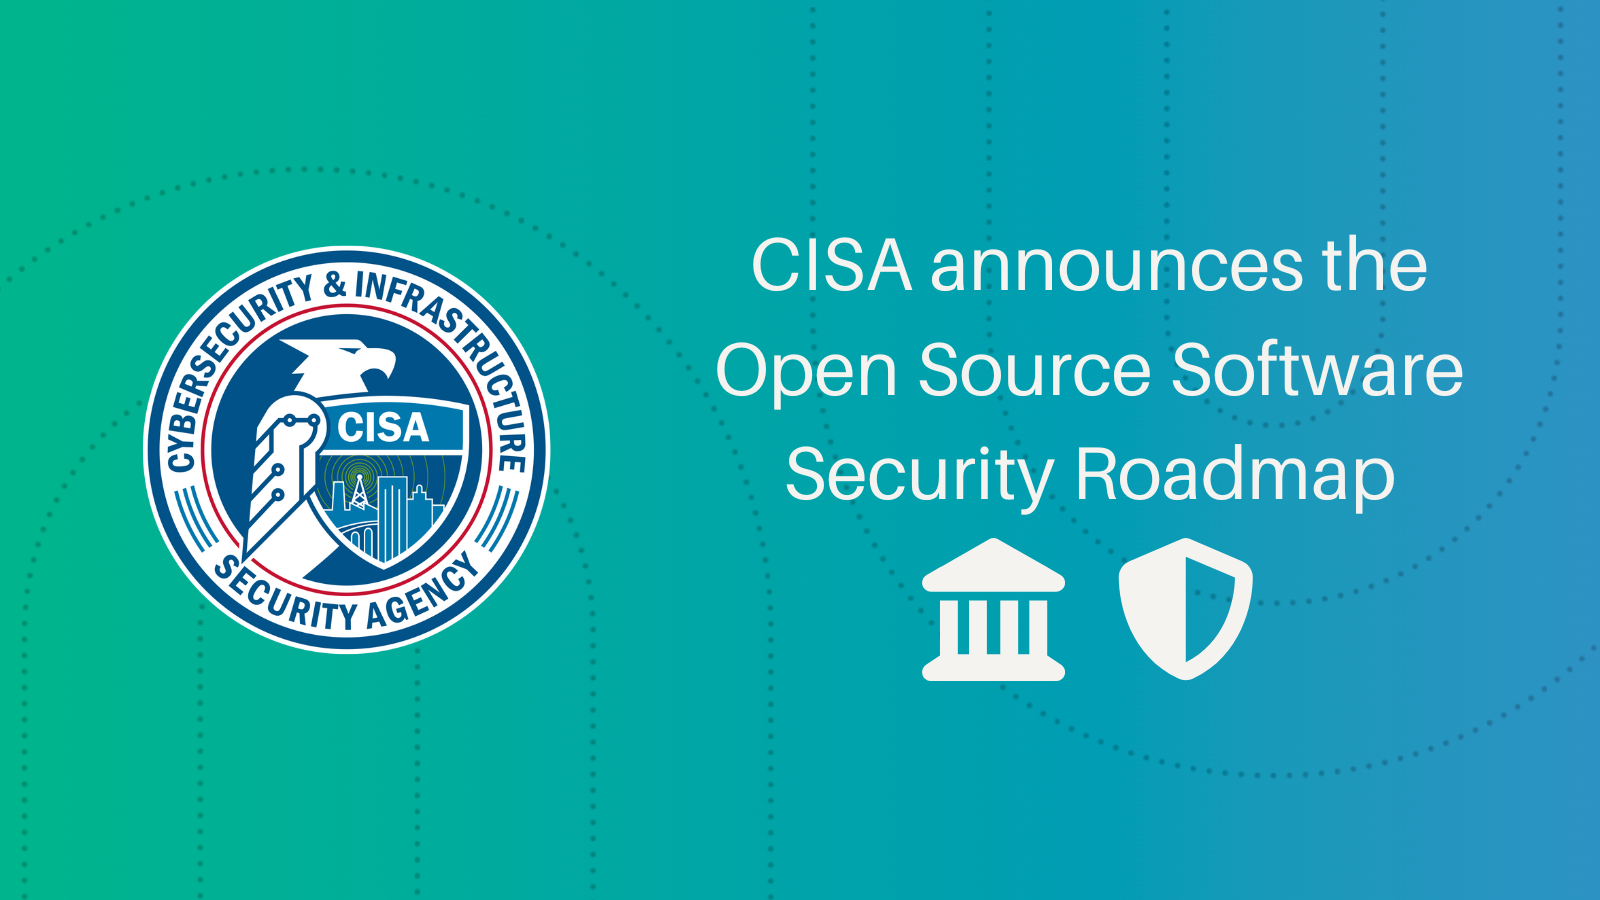 CISA announces the Open Source Software Security Roadmap